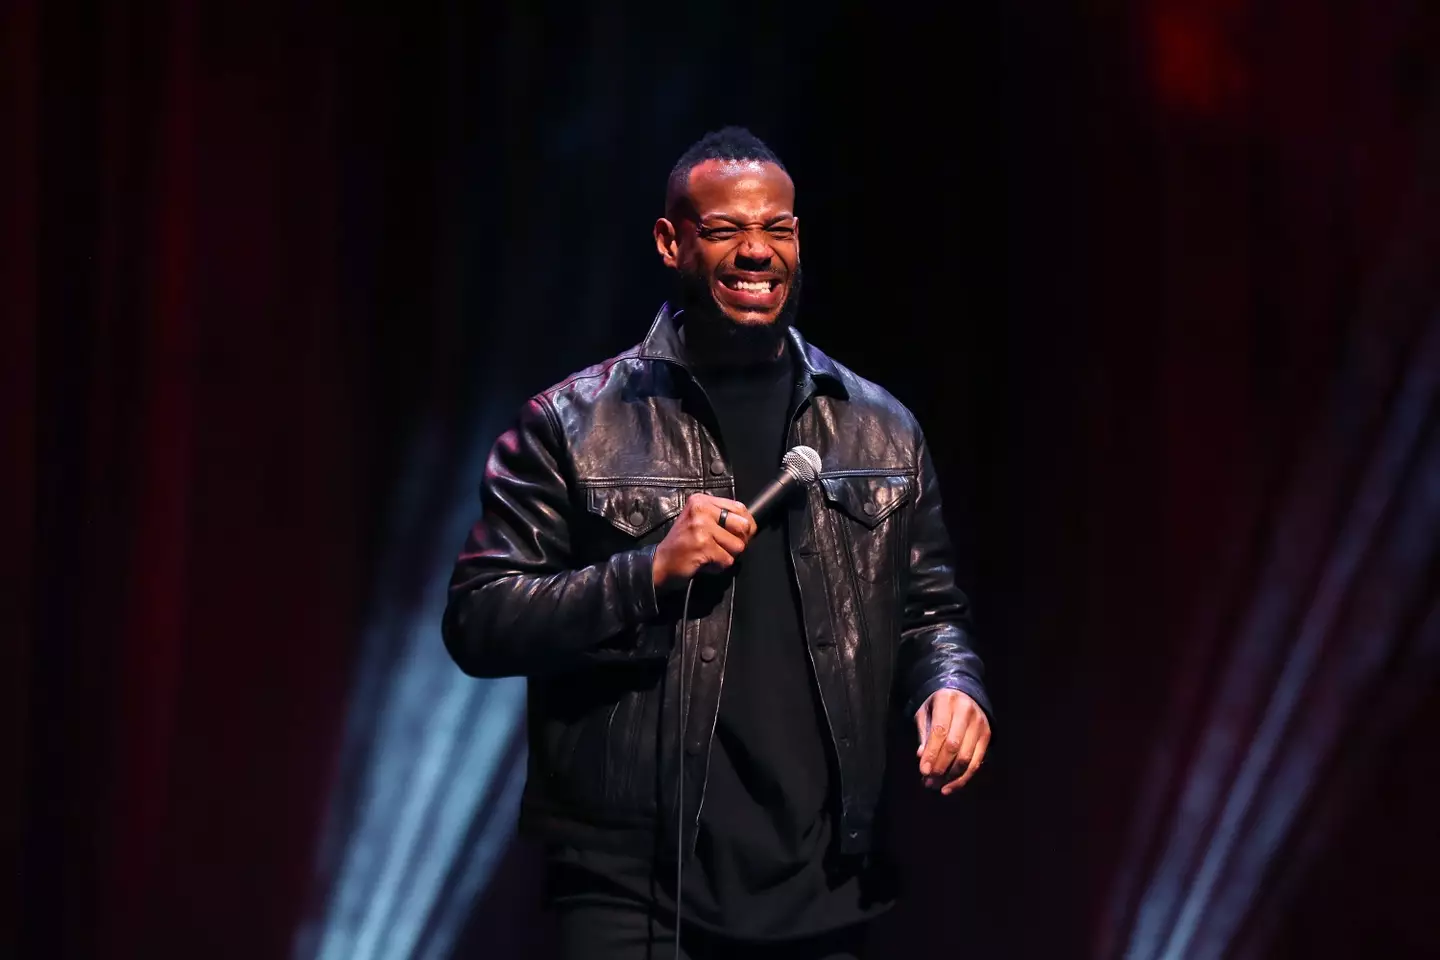 Since his mother passed, Wayans has admitted that he is now more open to the idea of getting married. (Shareif Ziyadat/Getty Images)